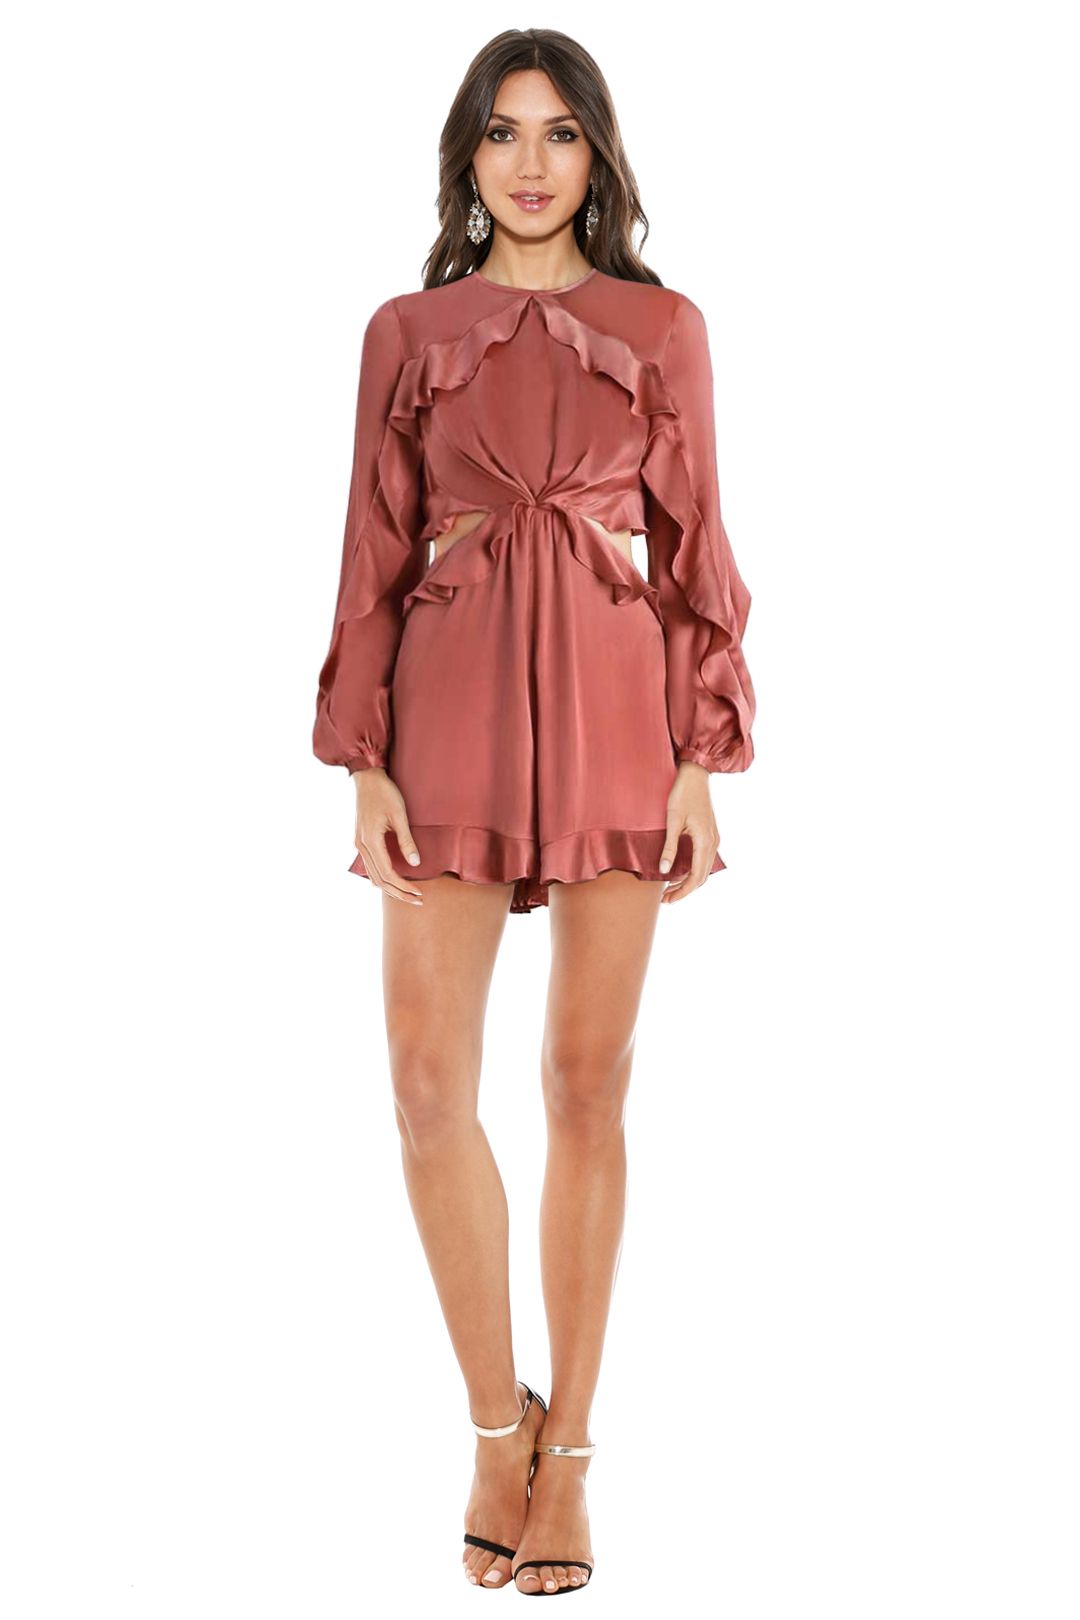 Zimmermann - Winsome Flutter Playsuit - Guava Pink - Front